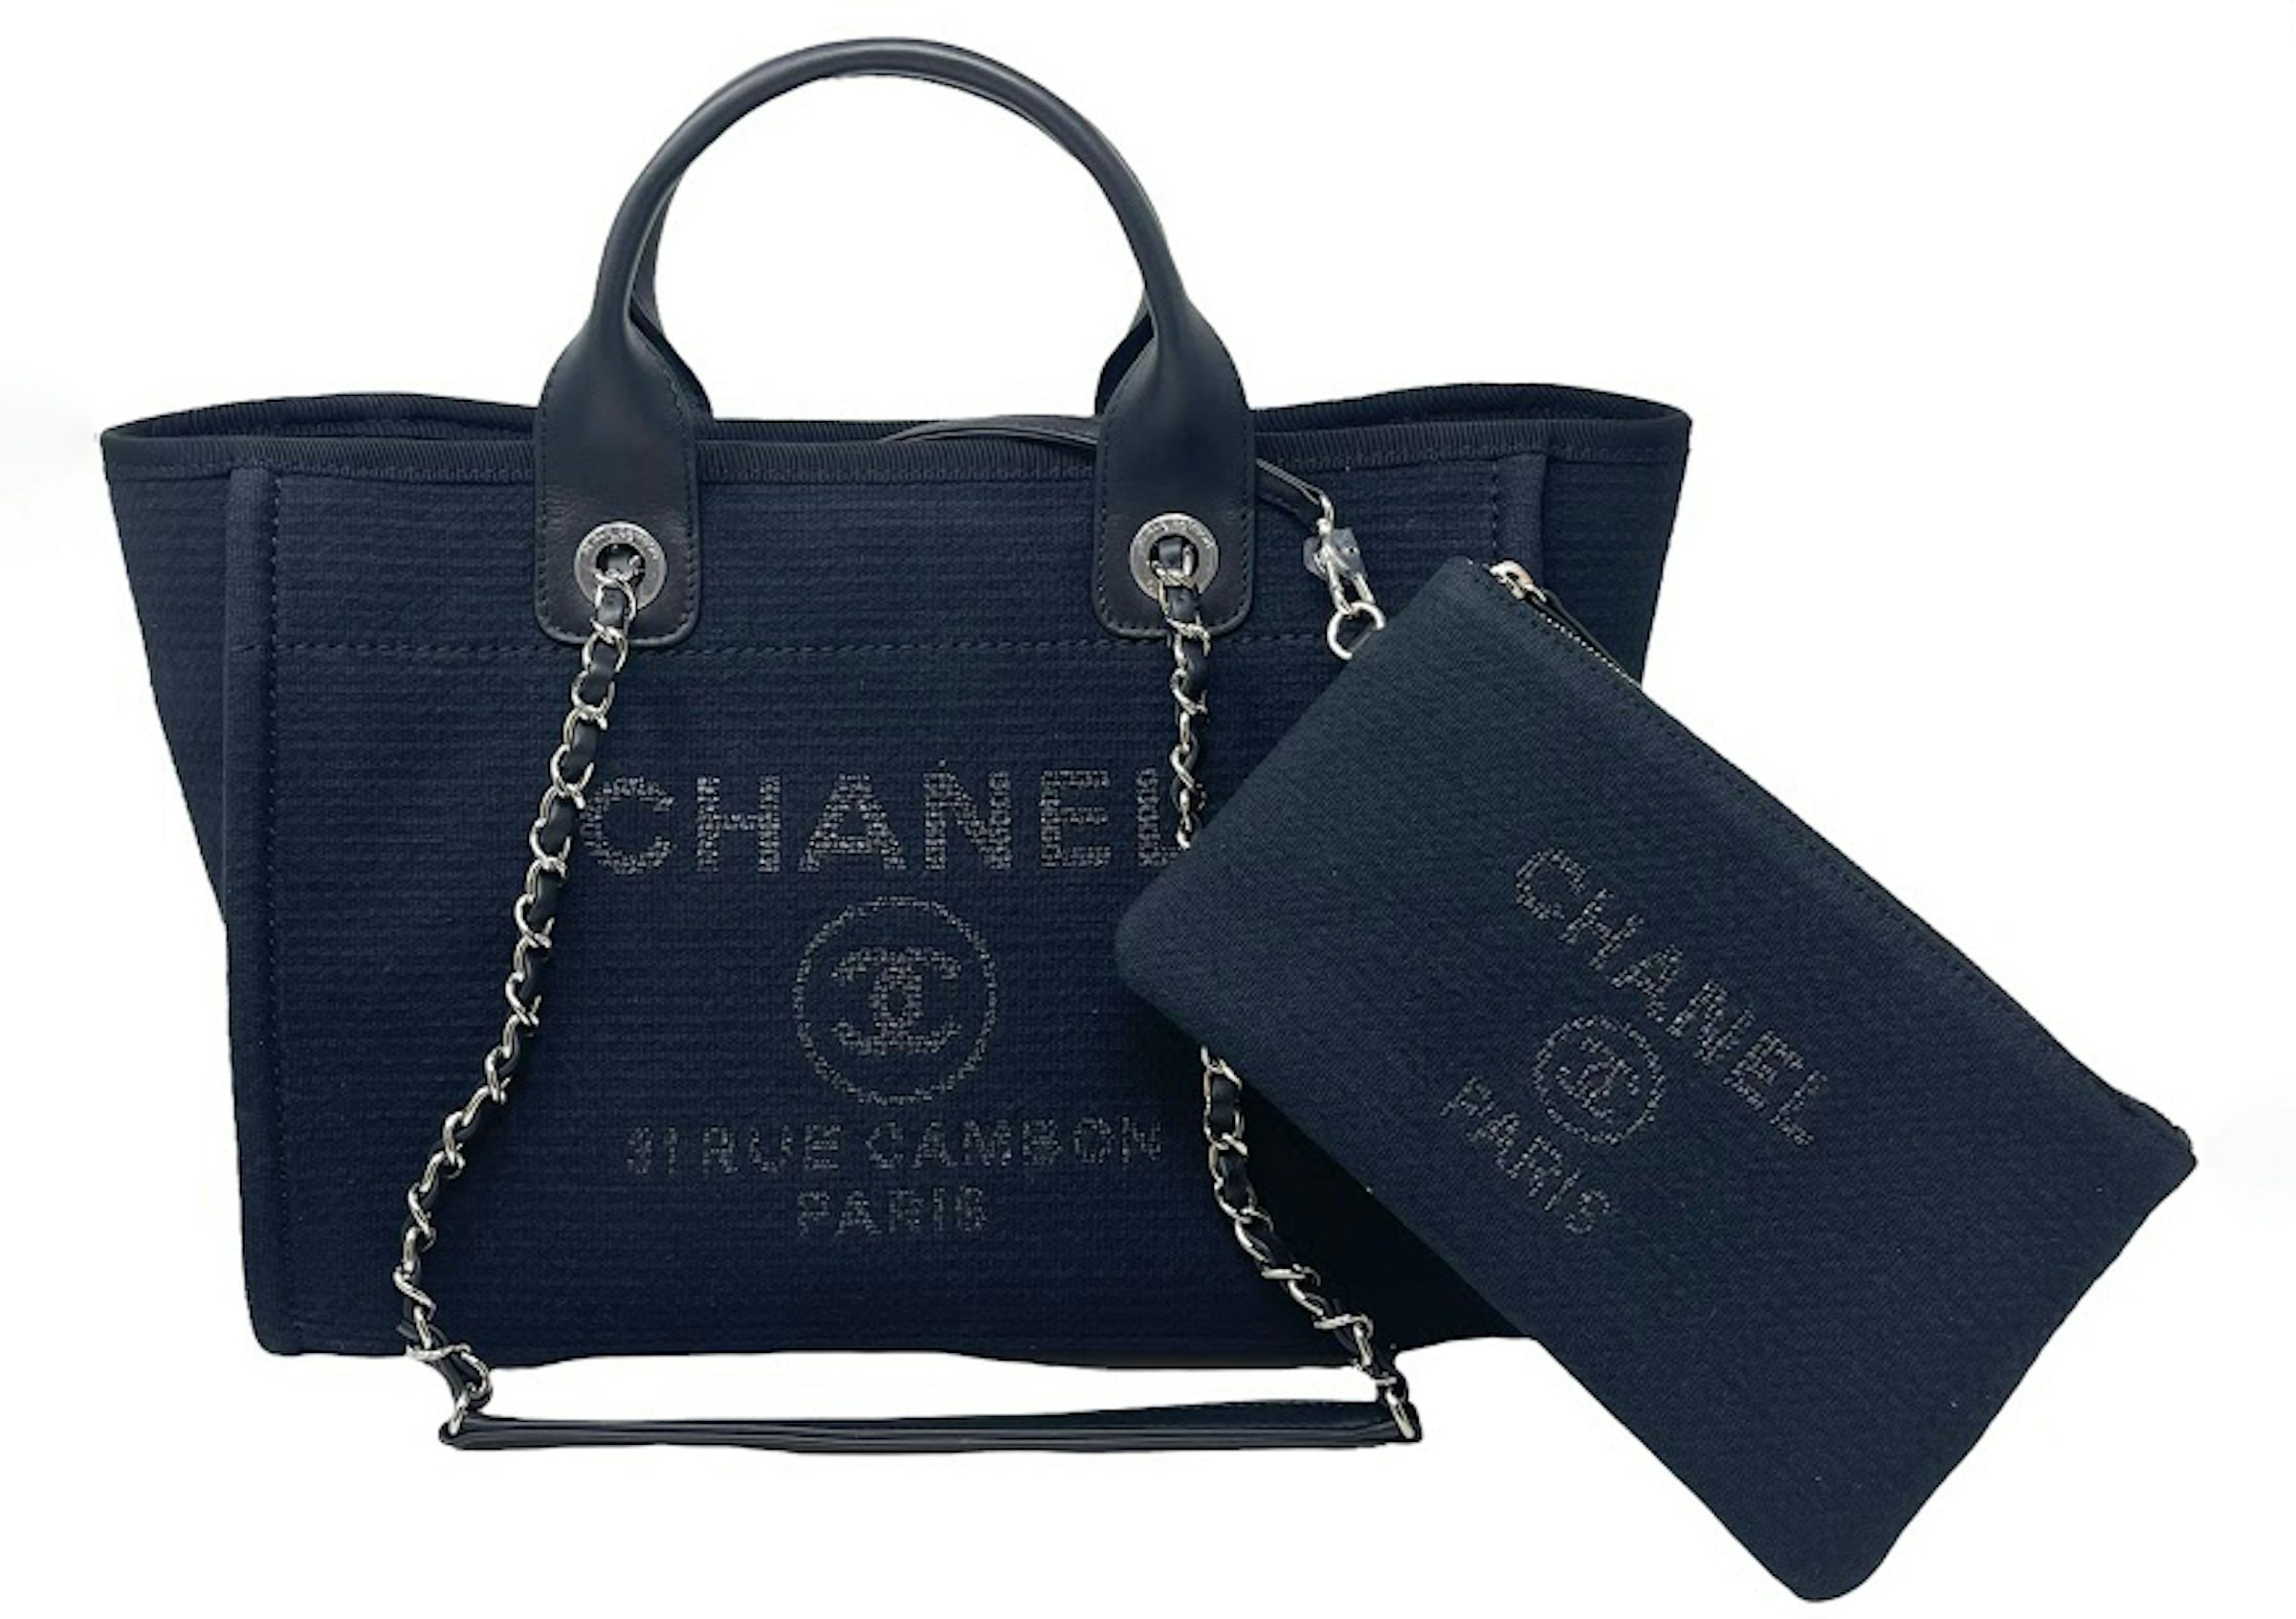 Chanel Pouch AP3095 Black in Lambskin Leather with Gold-tone - US